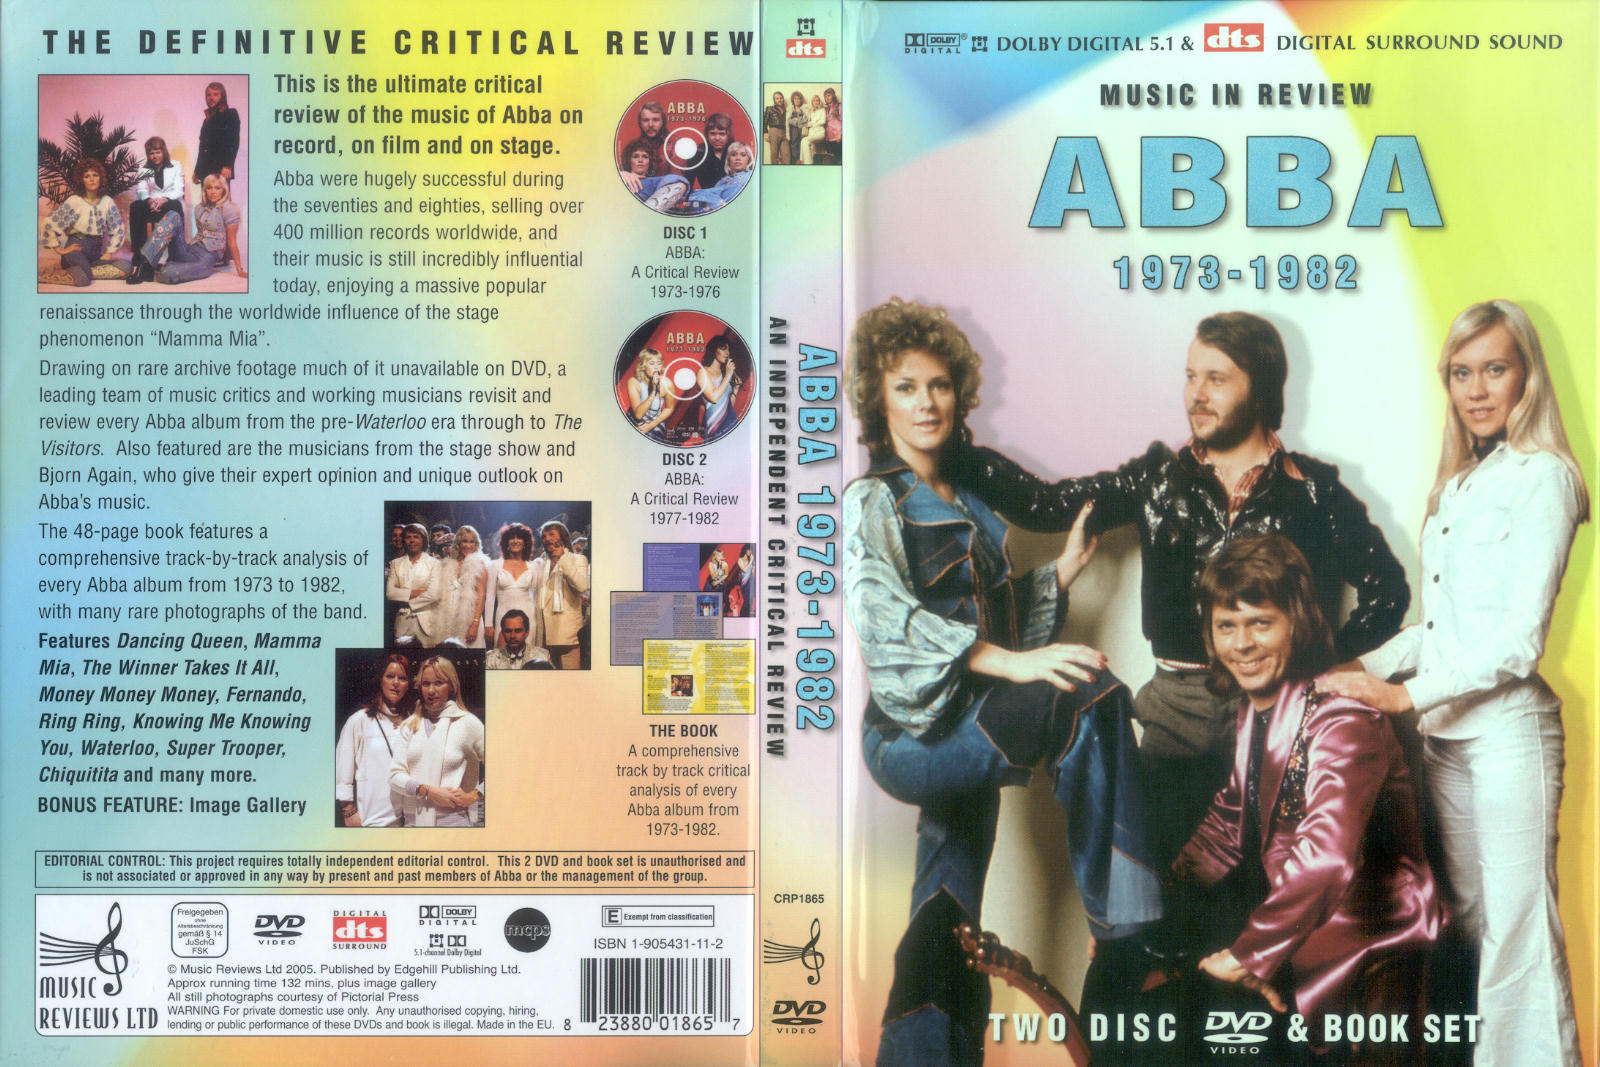 Jaquette DVD ABBA Music in review